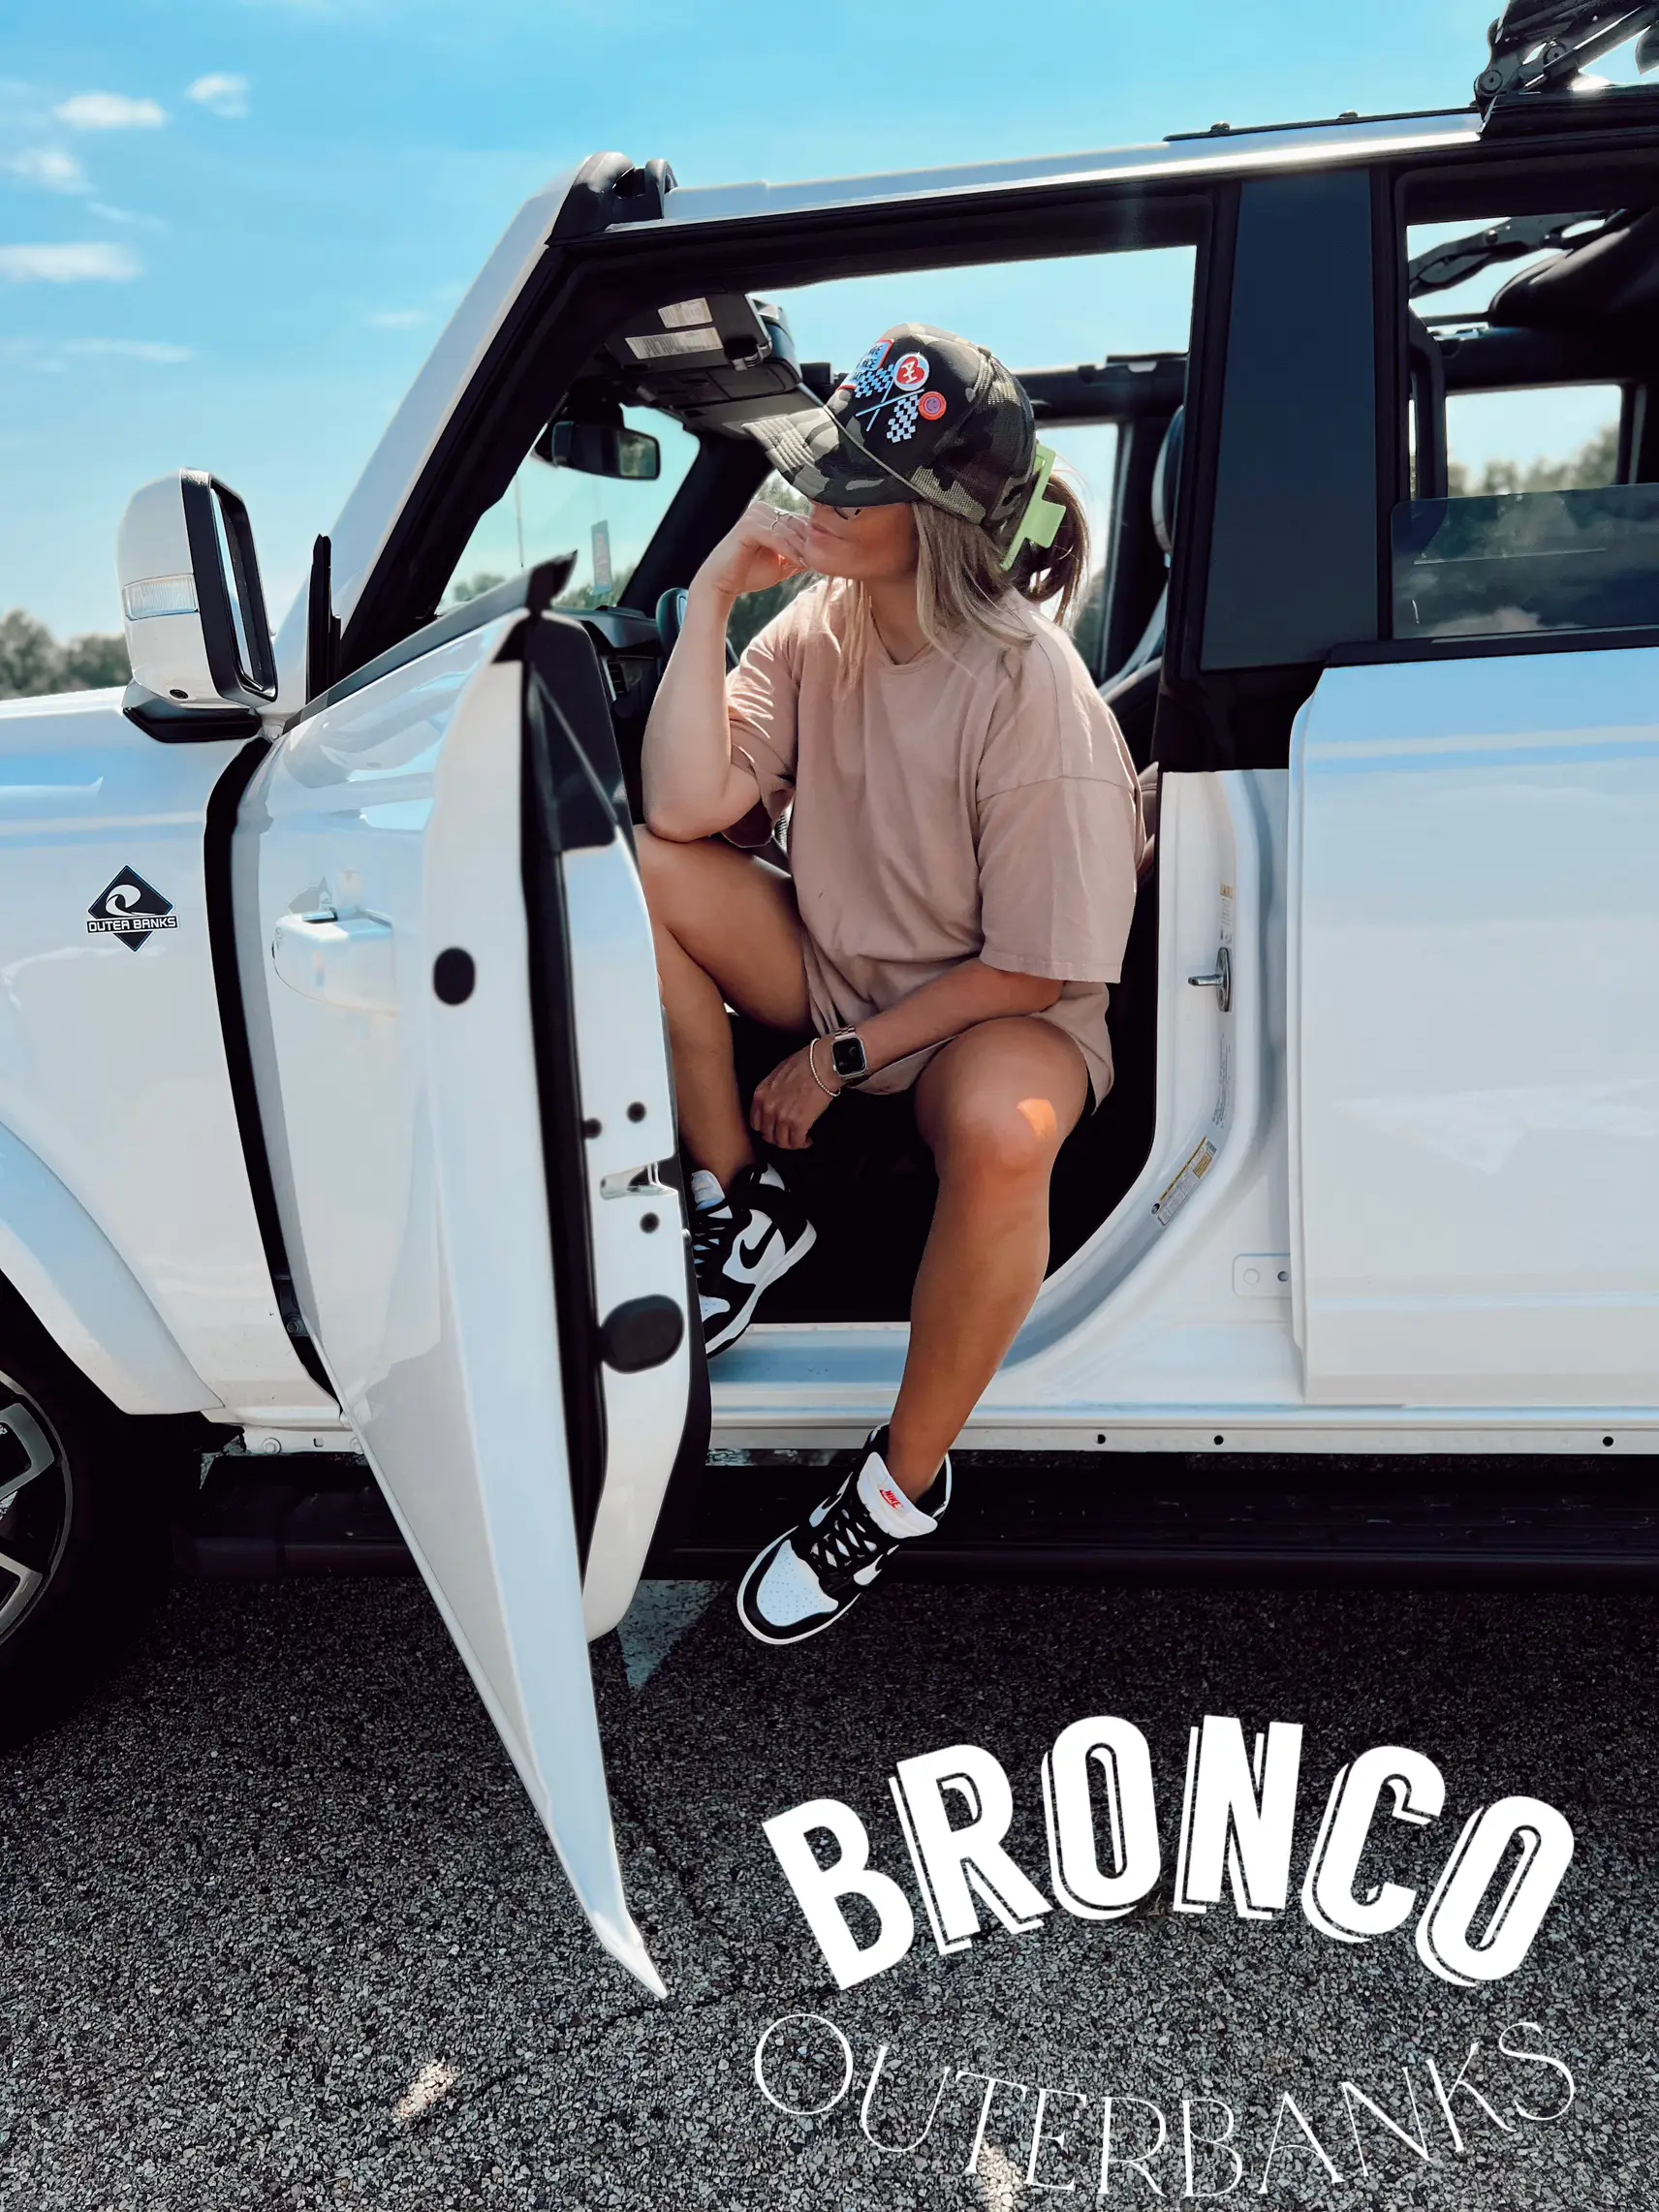 LoveShackFancy Partners with Vintage Bronco, Creates a One-of-a